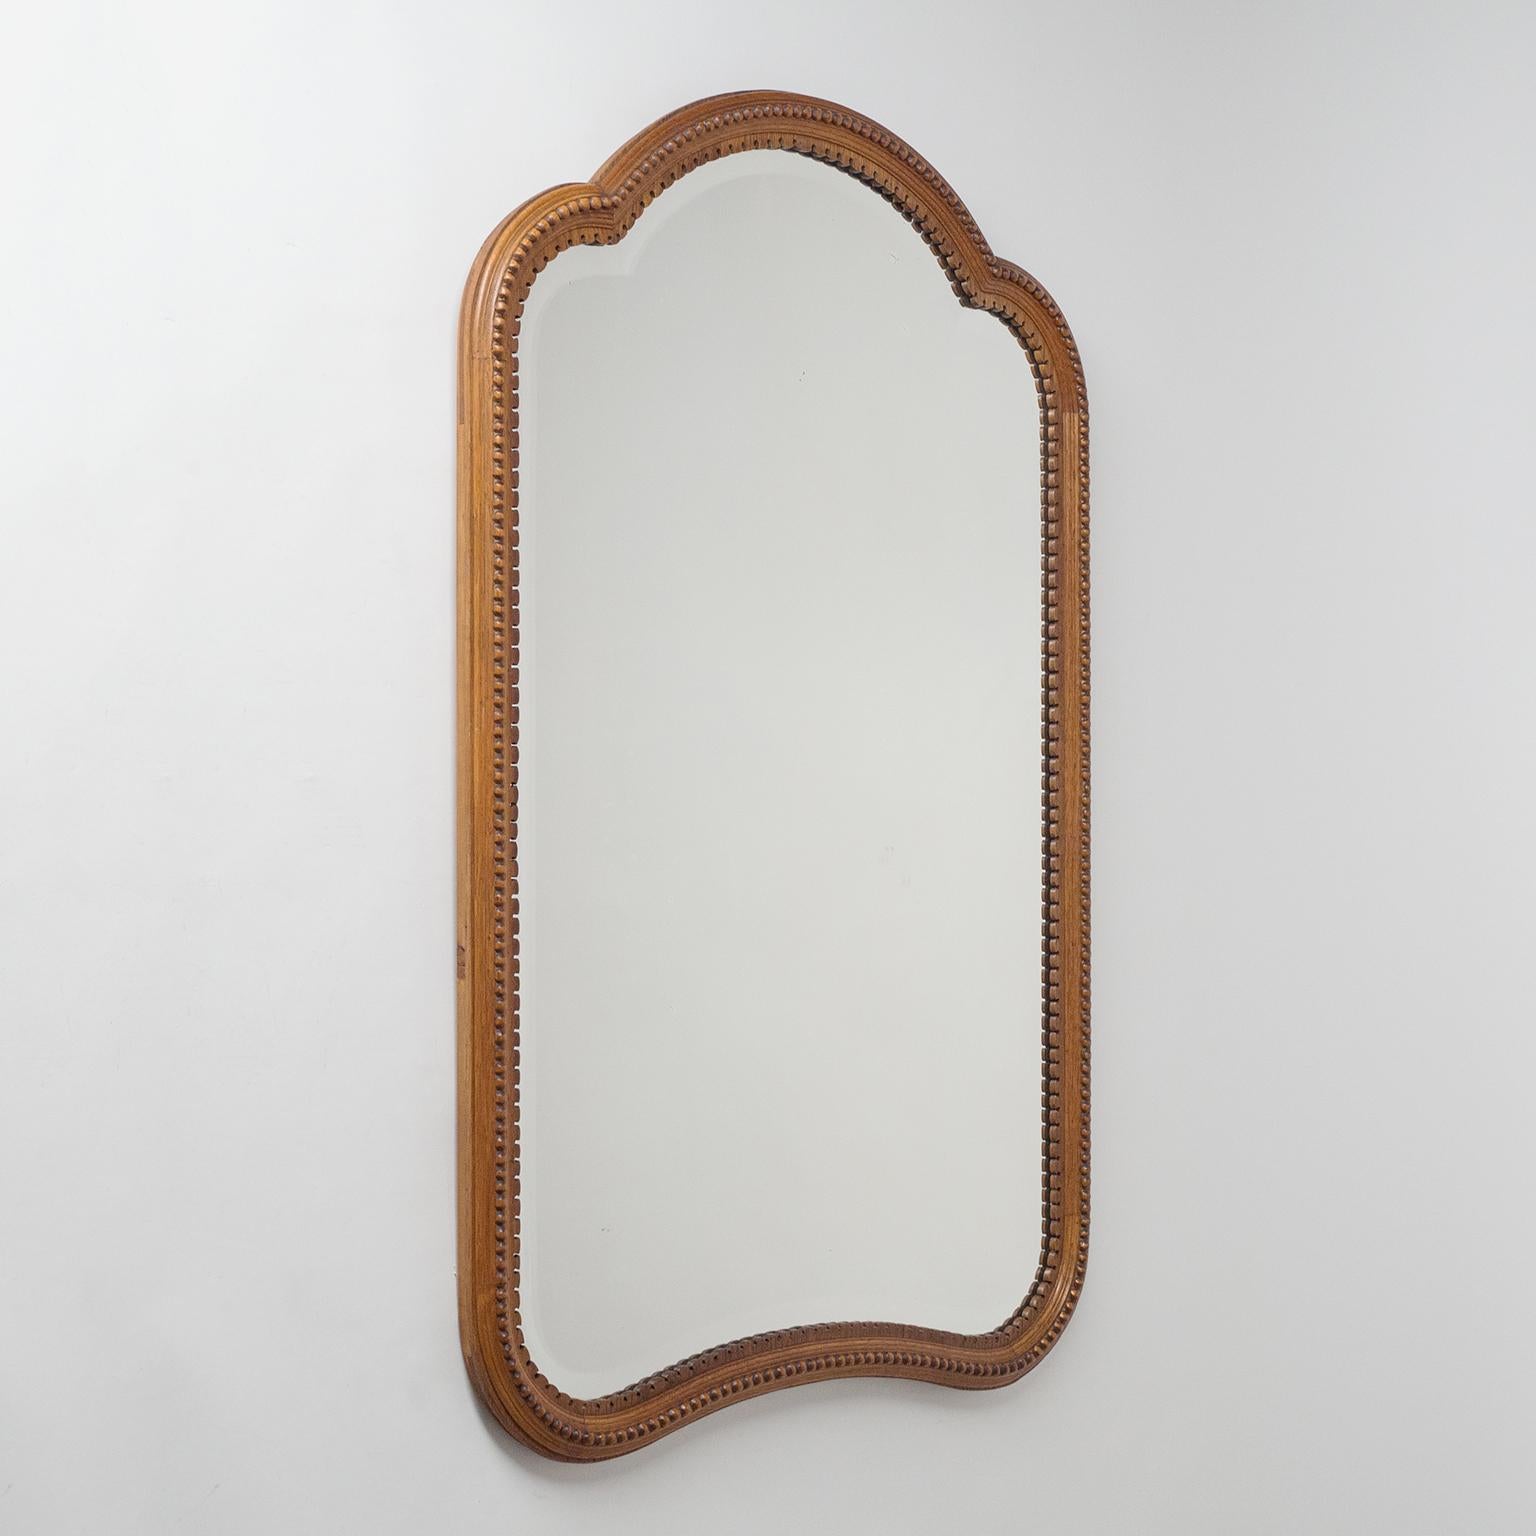 Fine carved oak mirror from the late 19th century. Solid oak frame with hand carved decorative elements in early Jugendstil manner. The original mirror glass, with a broad facet cut, is in good original condition with minor wear.